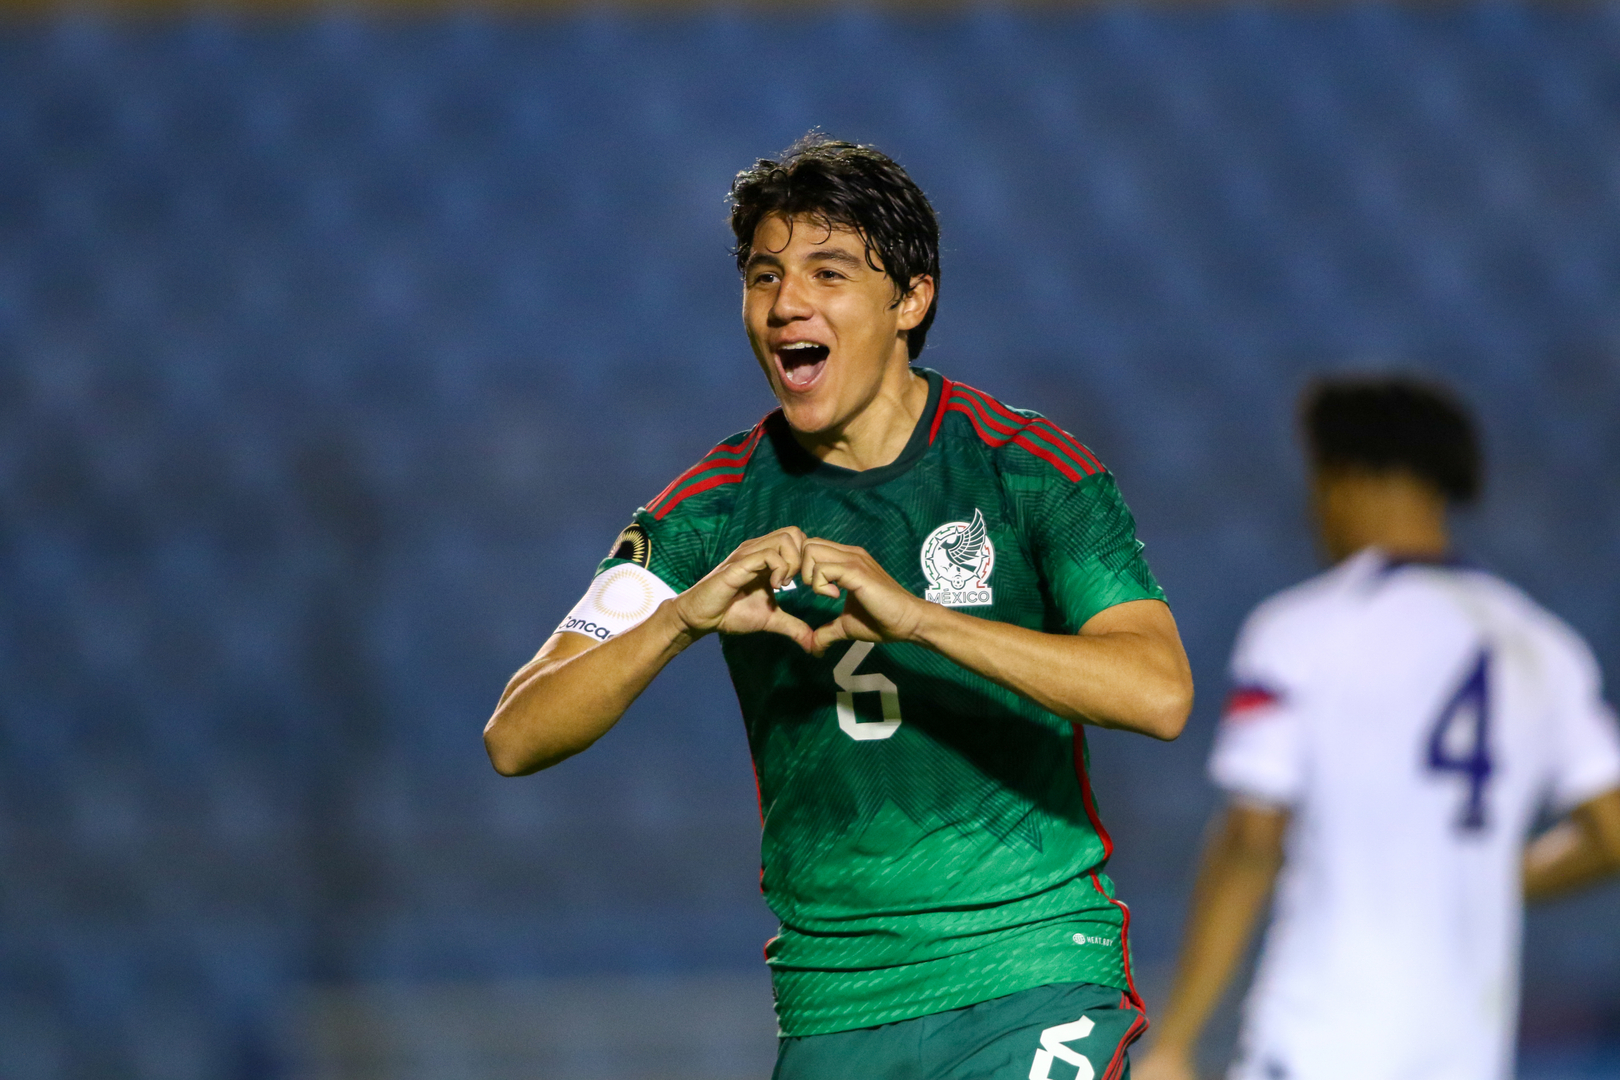 Mexico and USA Commence U17 Men’s World Cup Campaigns